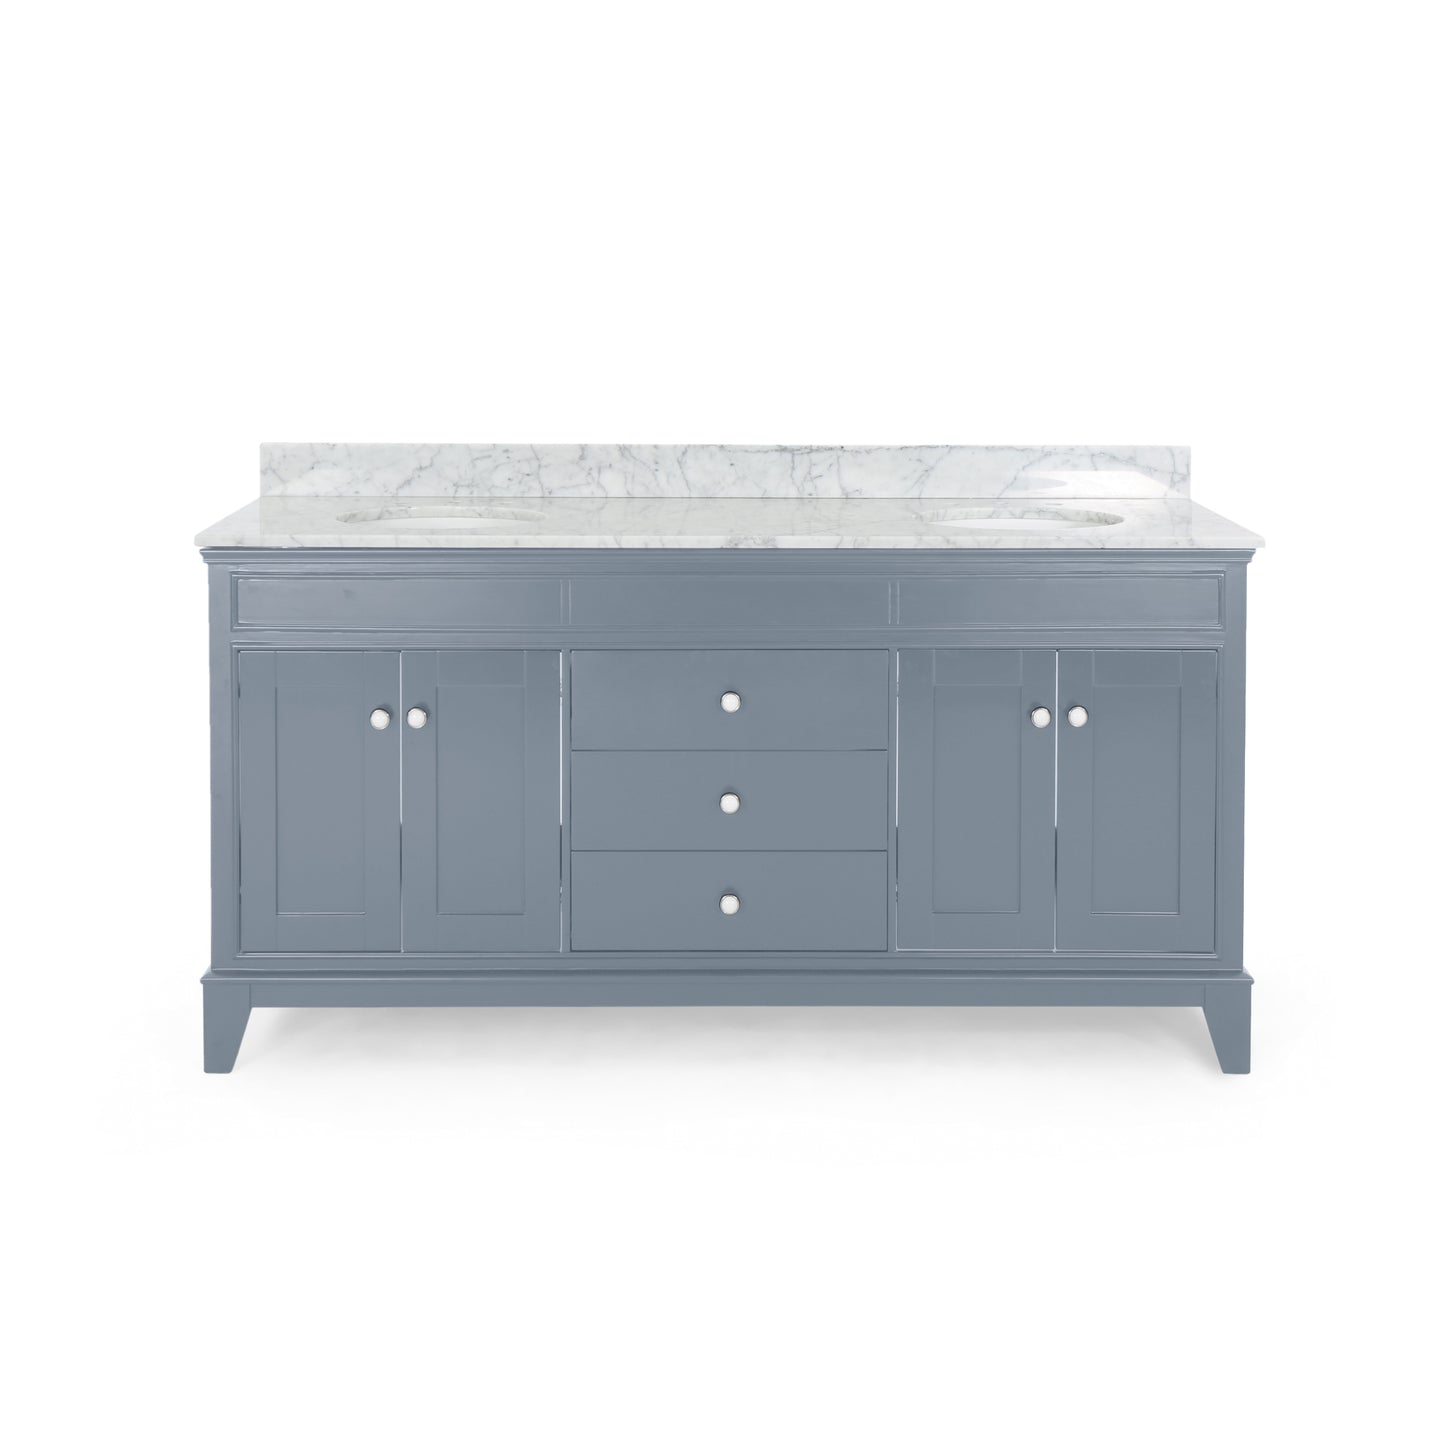 Feldspar Contemporary 72" Wood Double Sink Bathroom Vanity with Marble Counter Top with Carrara White Marble